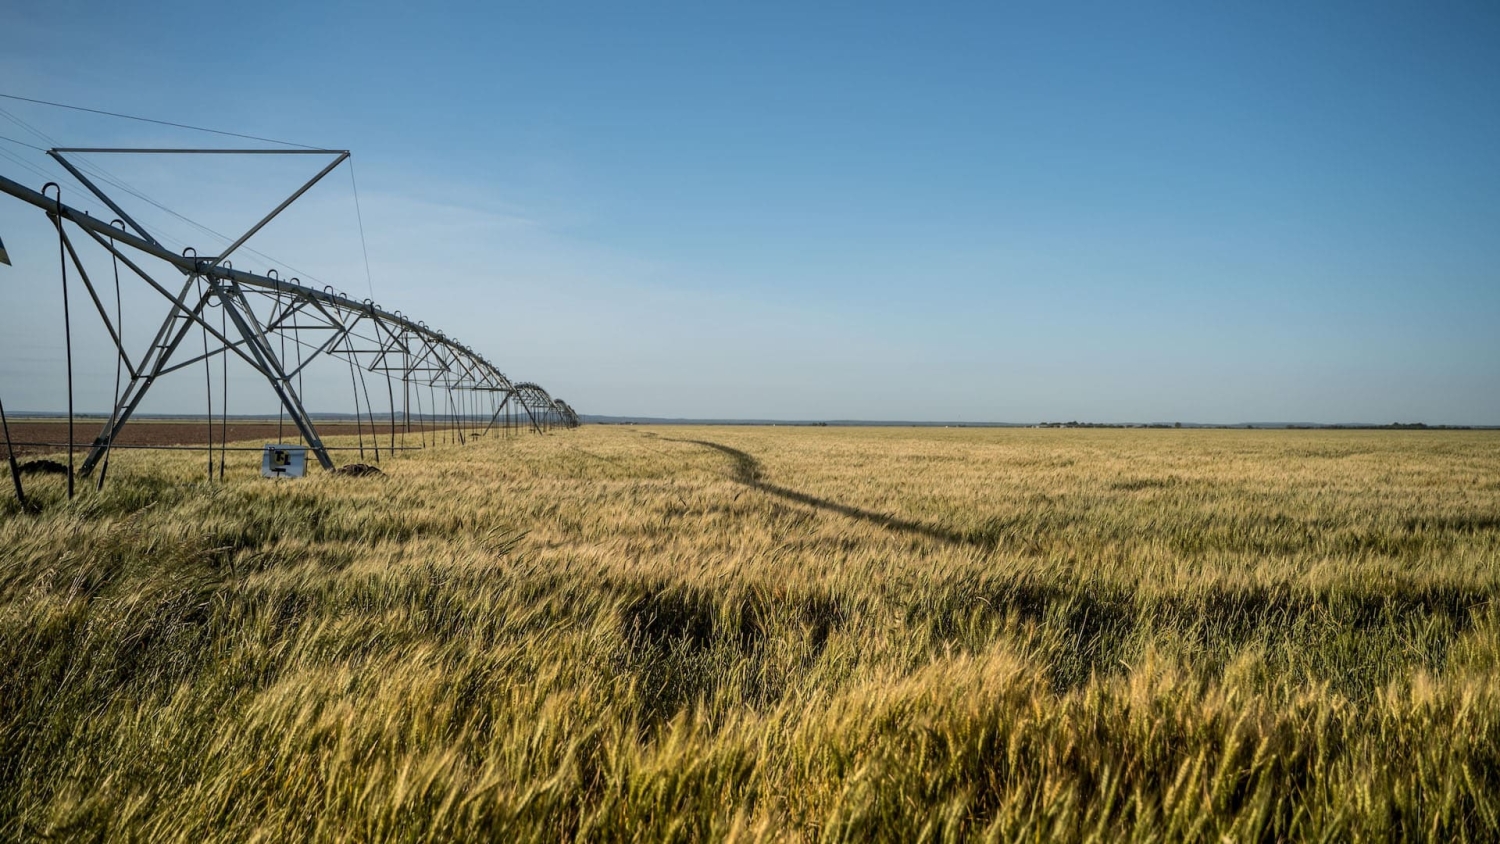 a long line of irrigation equipment stands in a field of grain under a blue sky